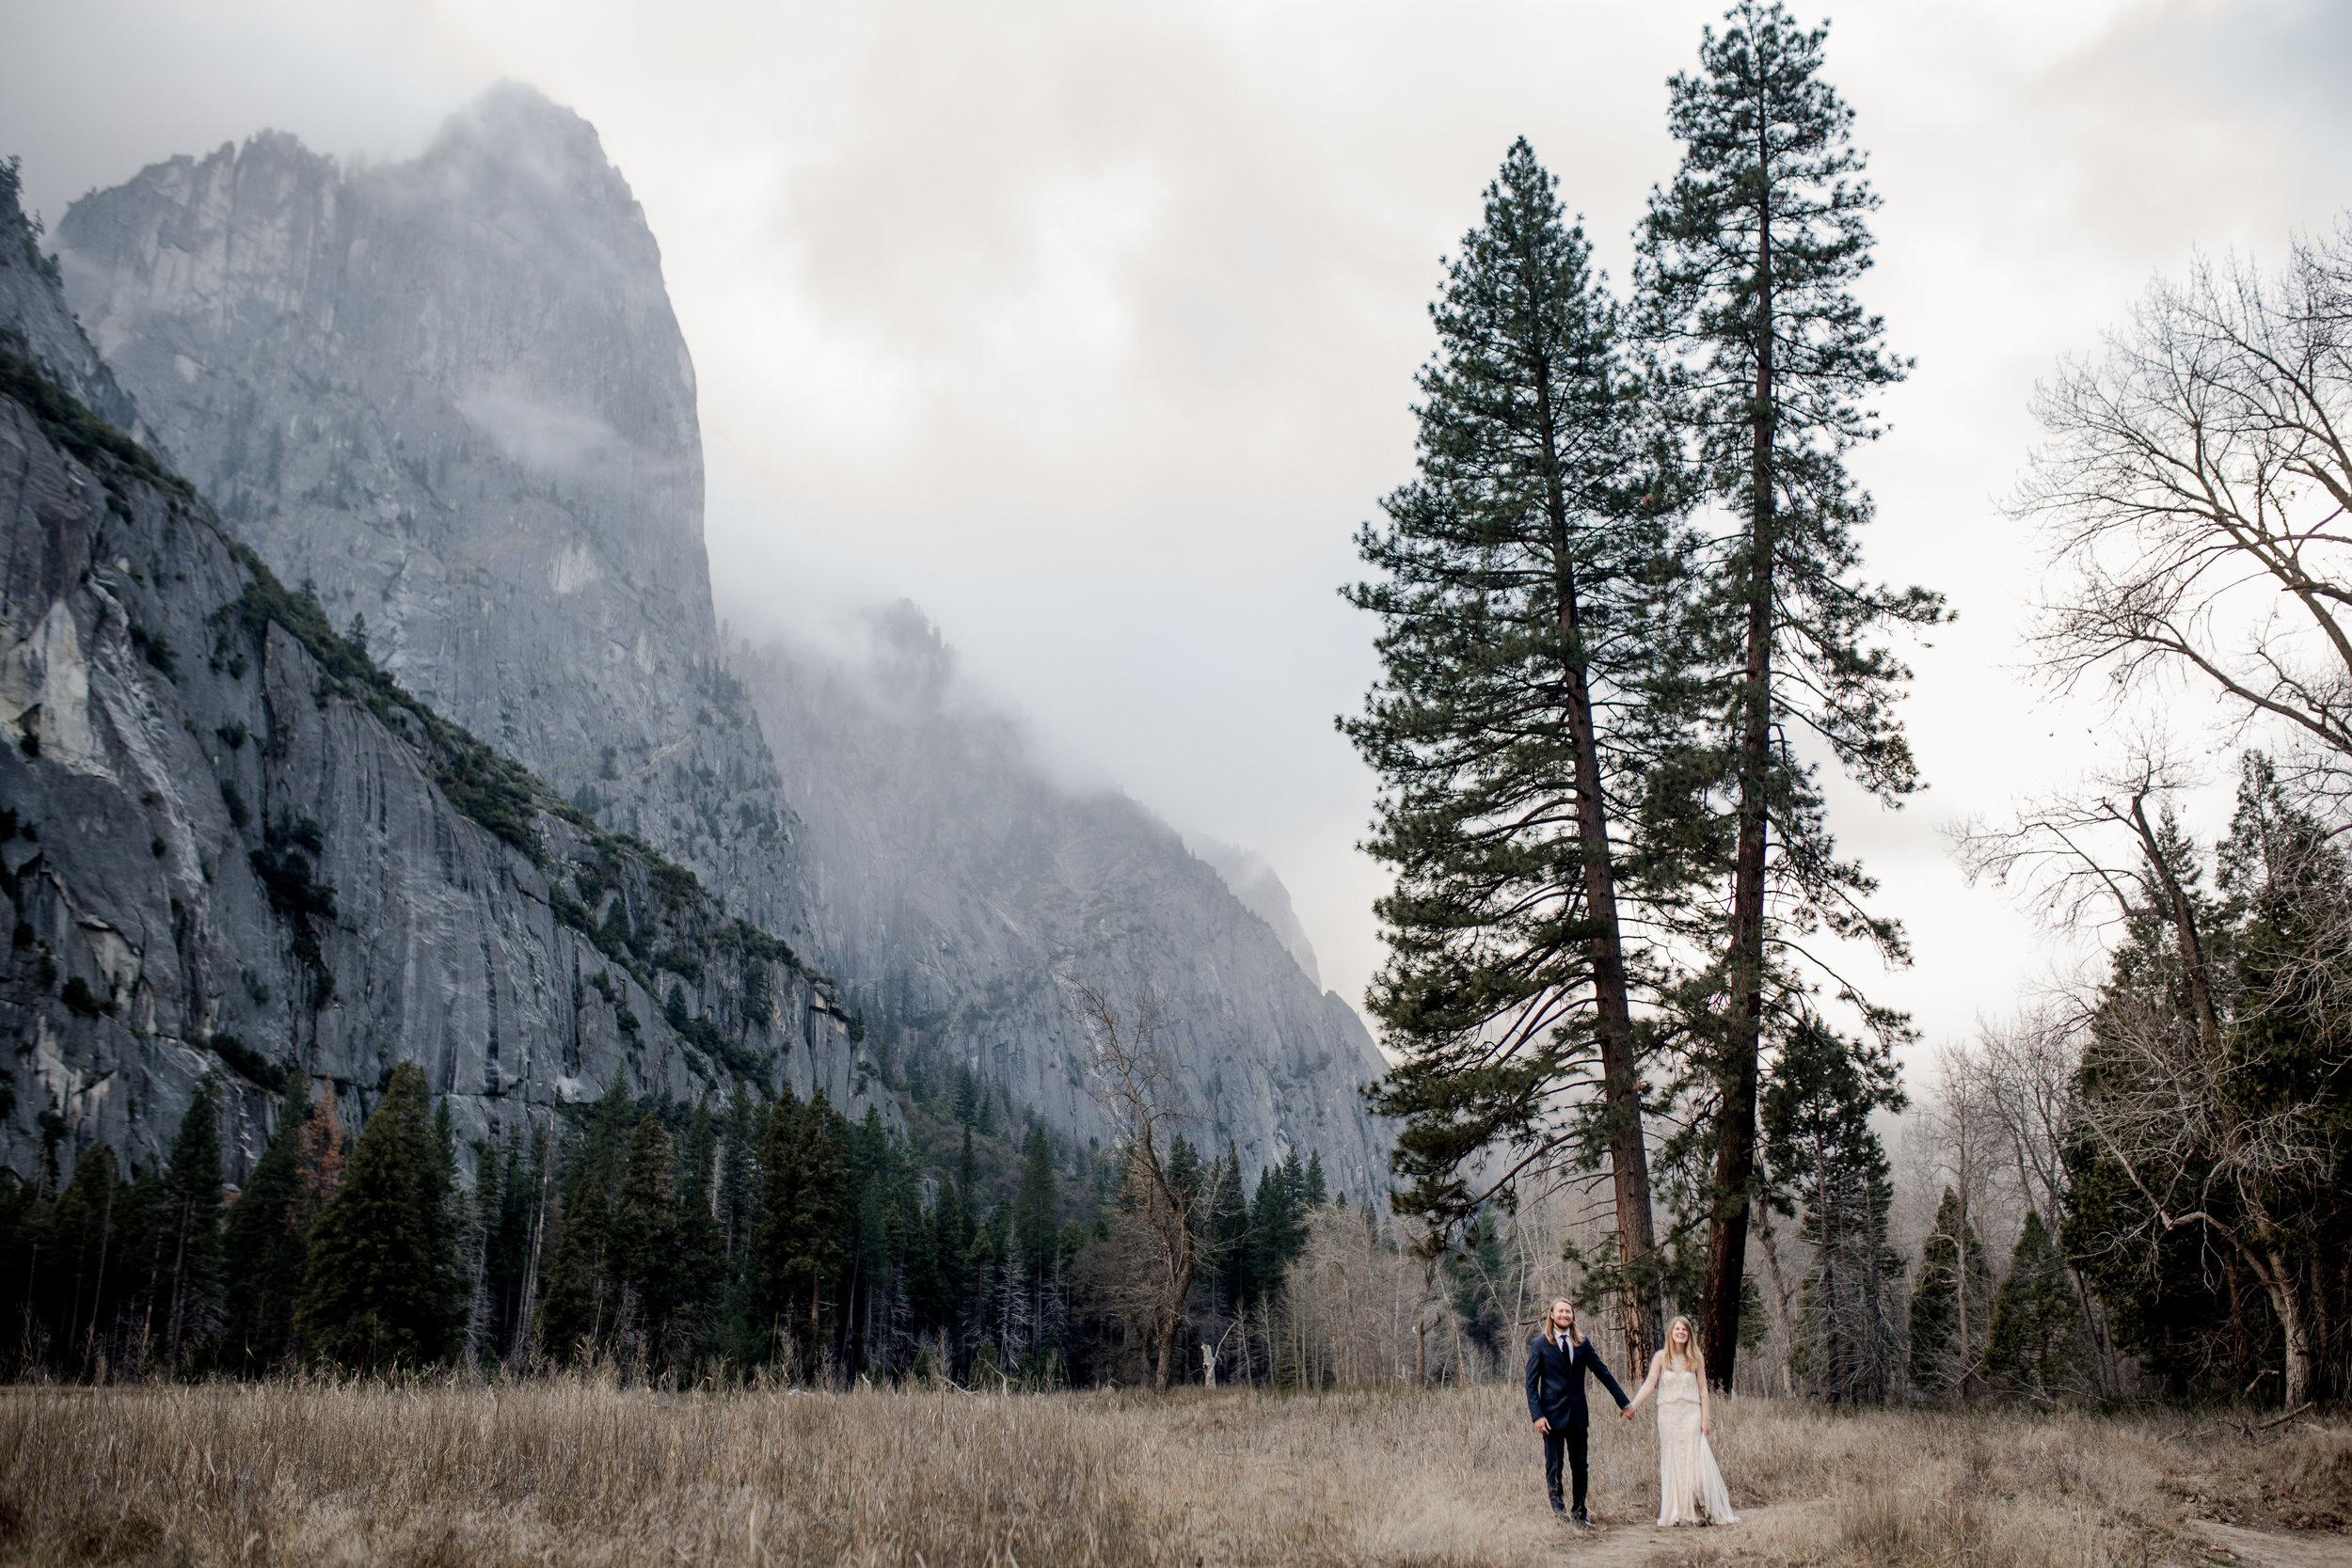 nicole-daacke-photography-yousemite-national-park-elopement-photographer-winter-cloud-moody-elope-inspiration-yosemite-valley-tunnel-view-winter-cloud-fog-weather-wedding-photos-59.jpg